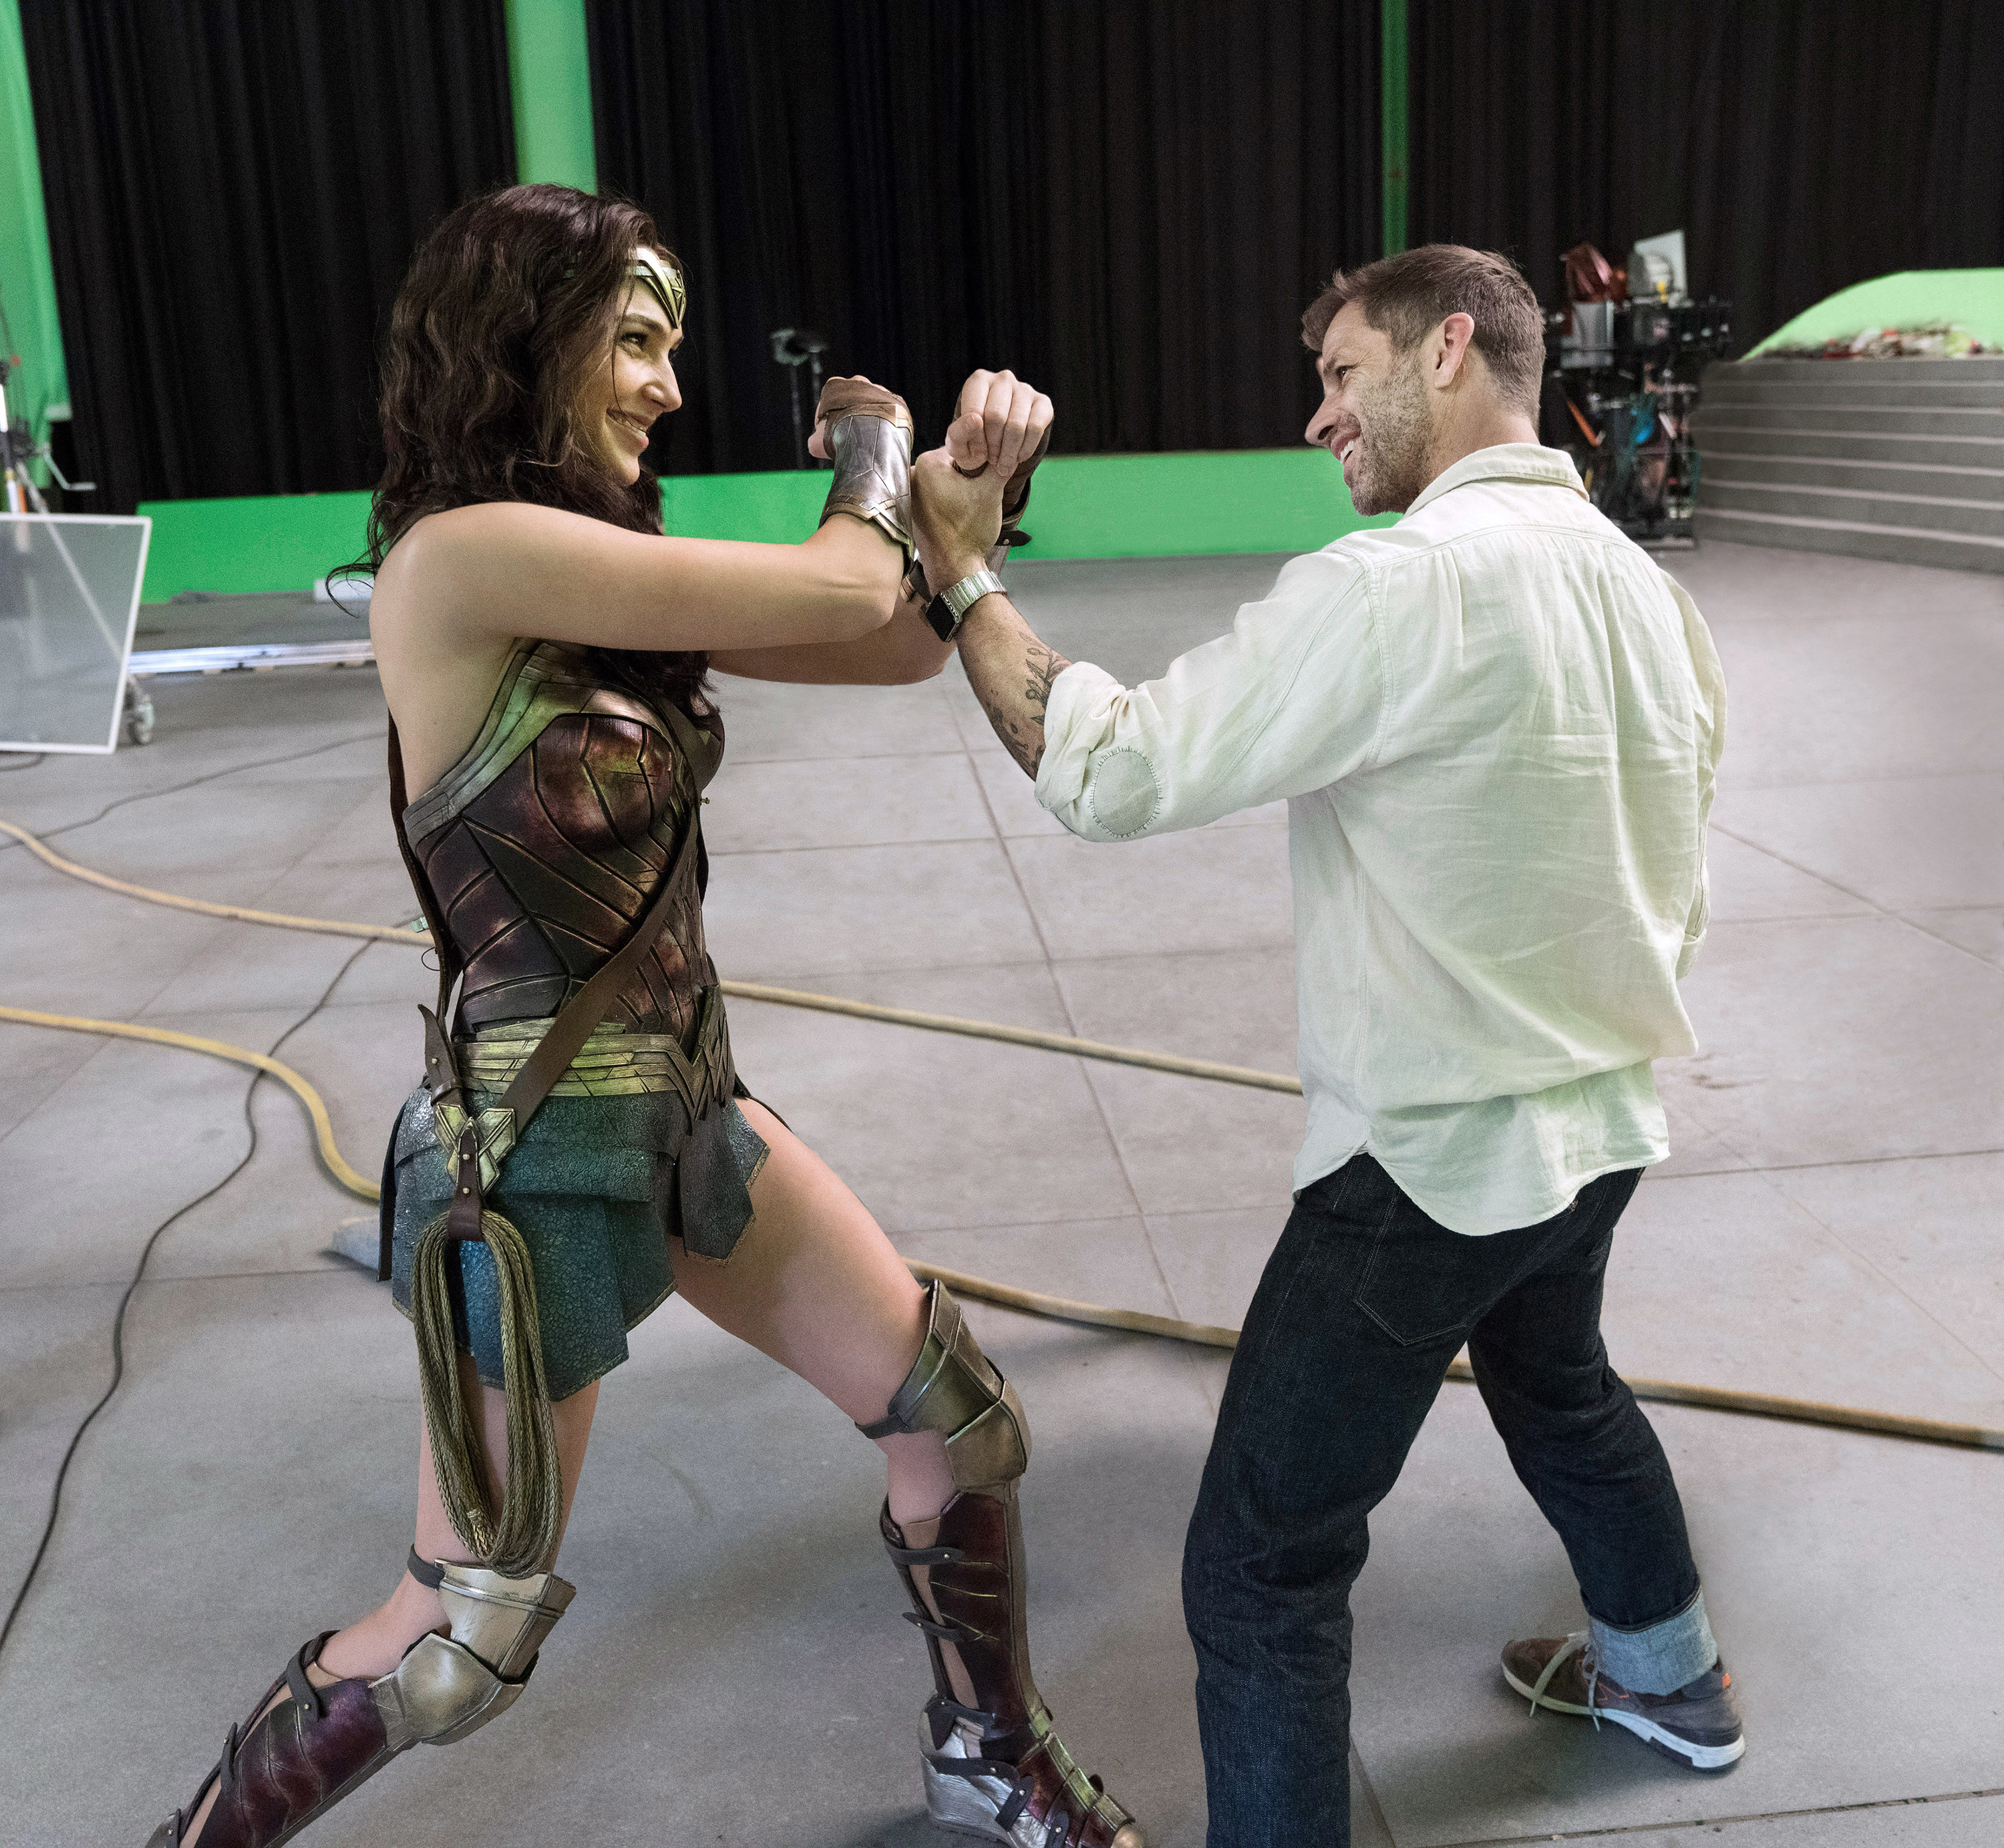 Snyder and Gal Gadot having fun between filming